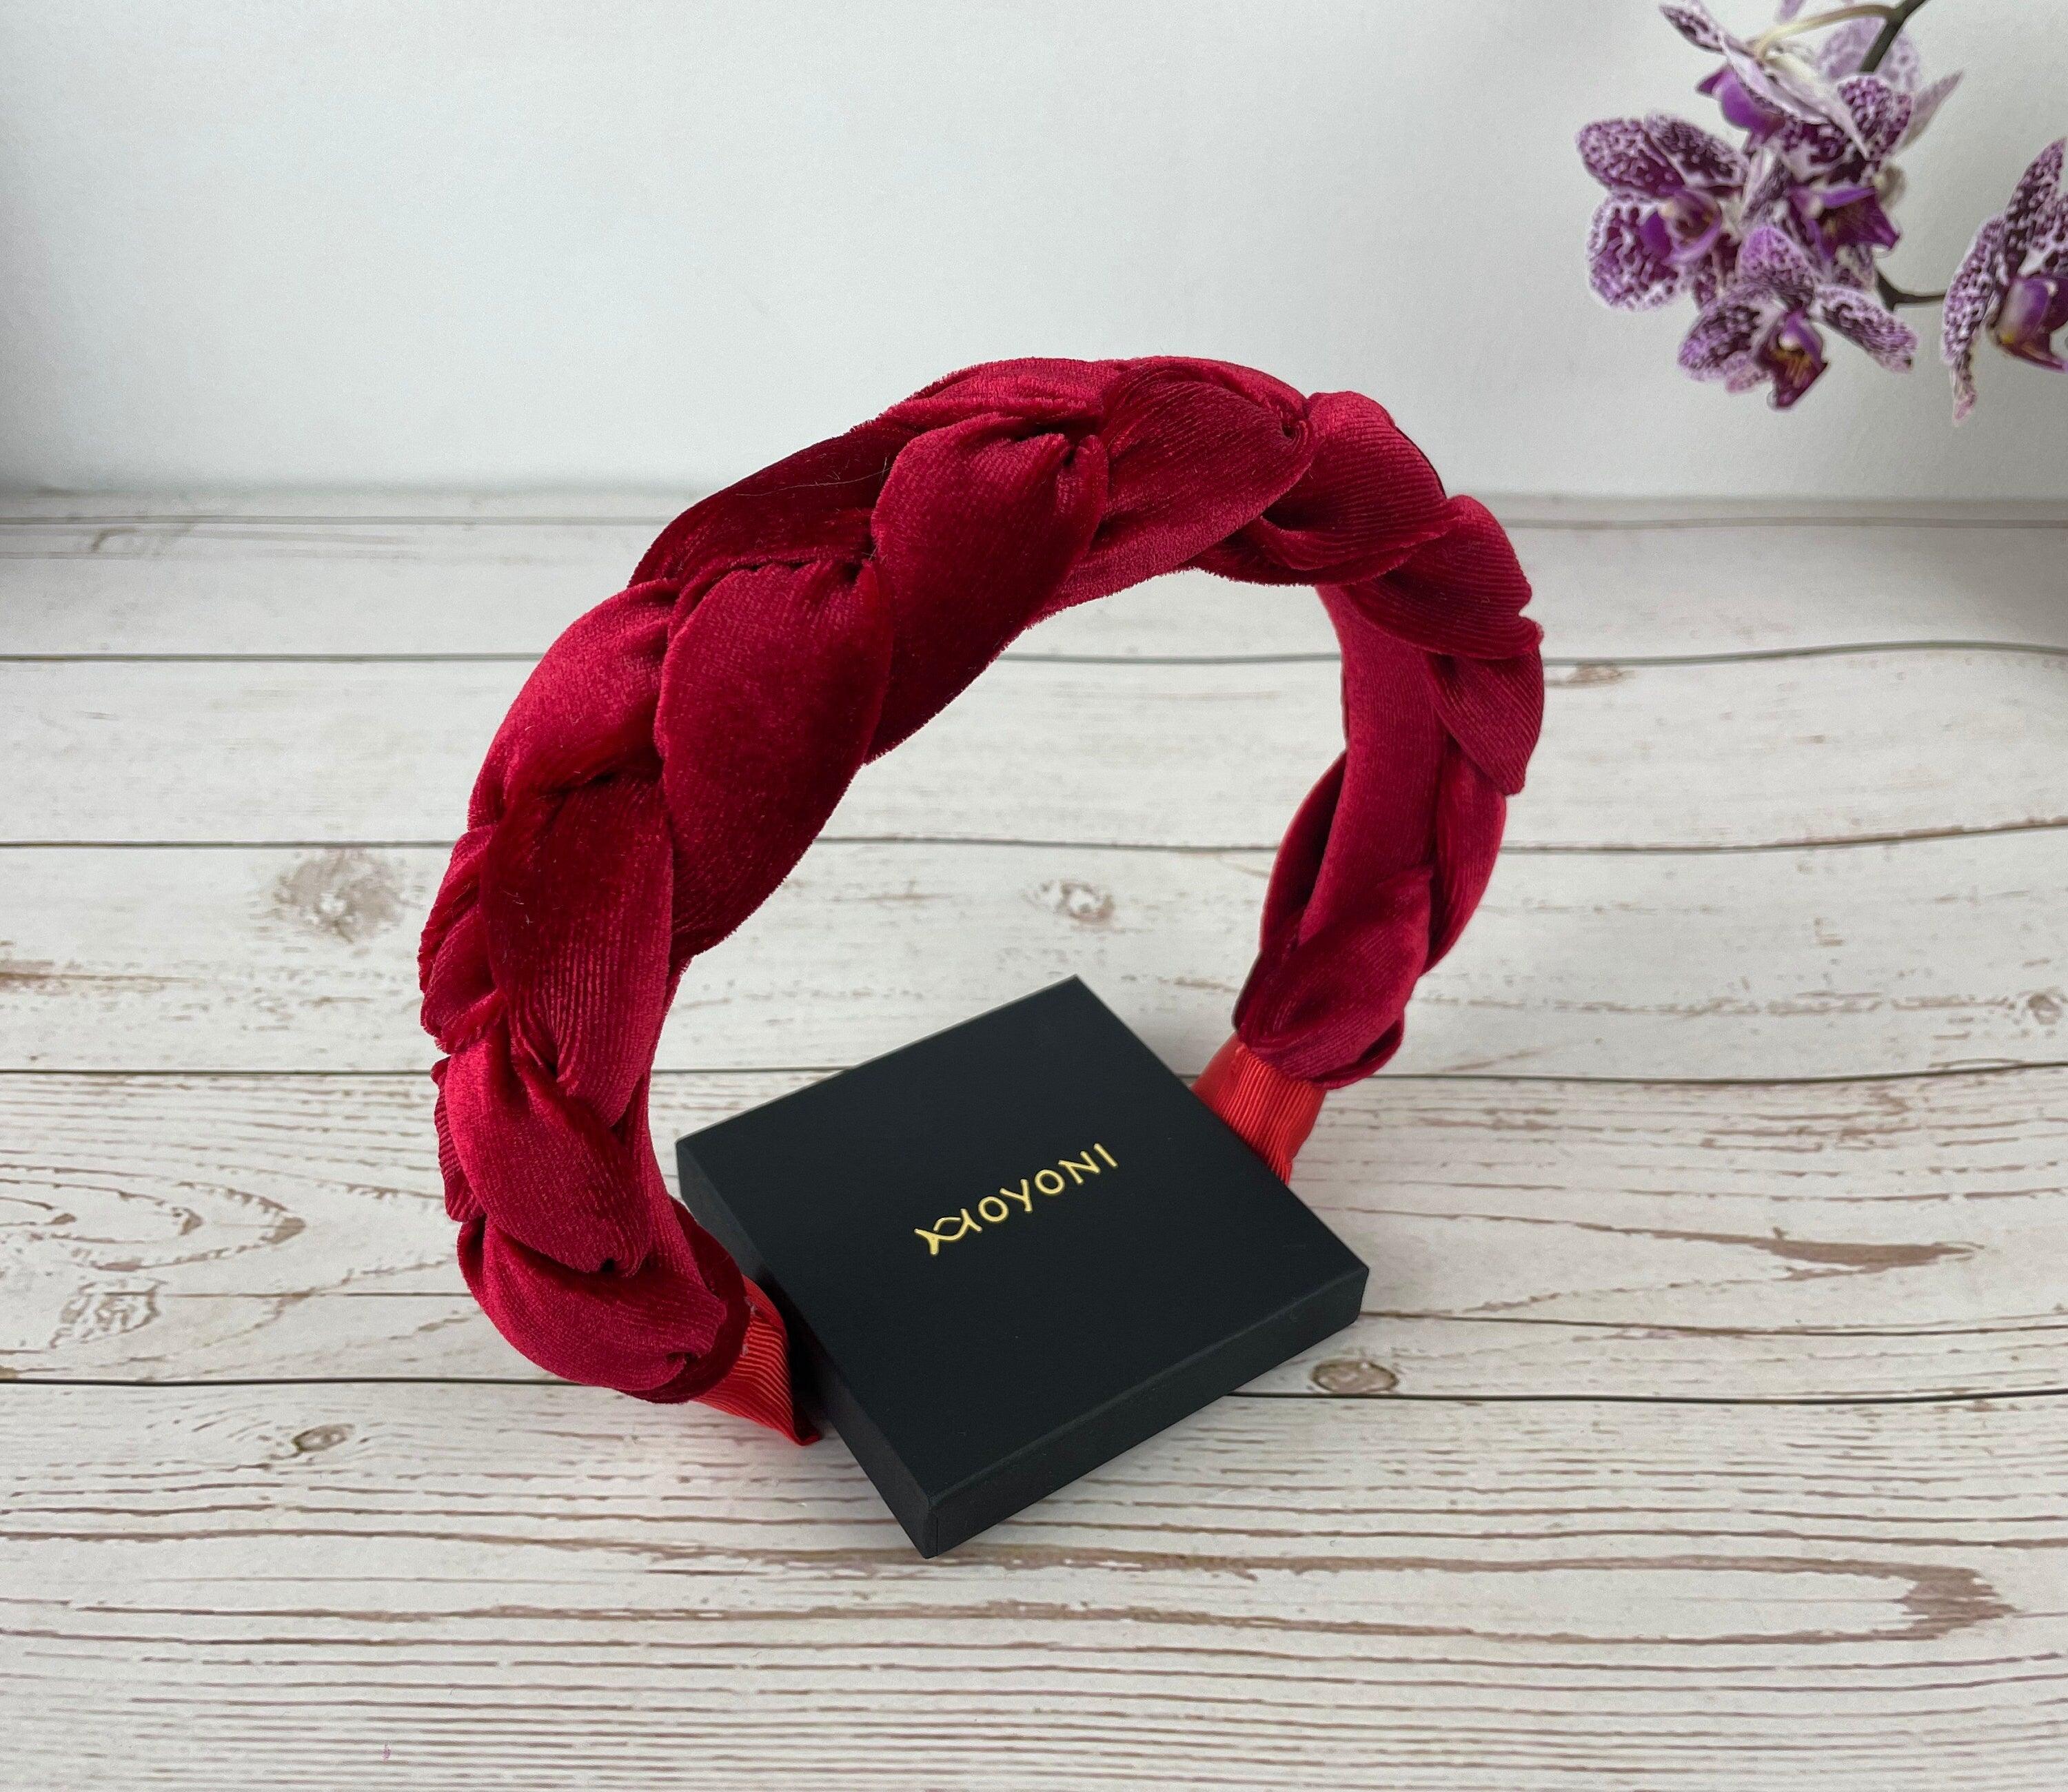 Elegant Red Velvet Braided Headband for Women with Padded Stylish Design - Perfect Gift for Her - Handmade Hair Accessory available at Moyoni Design